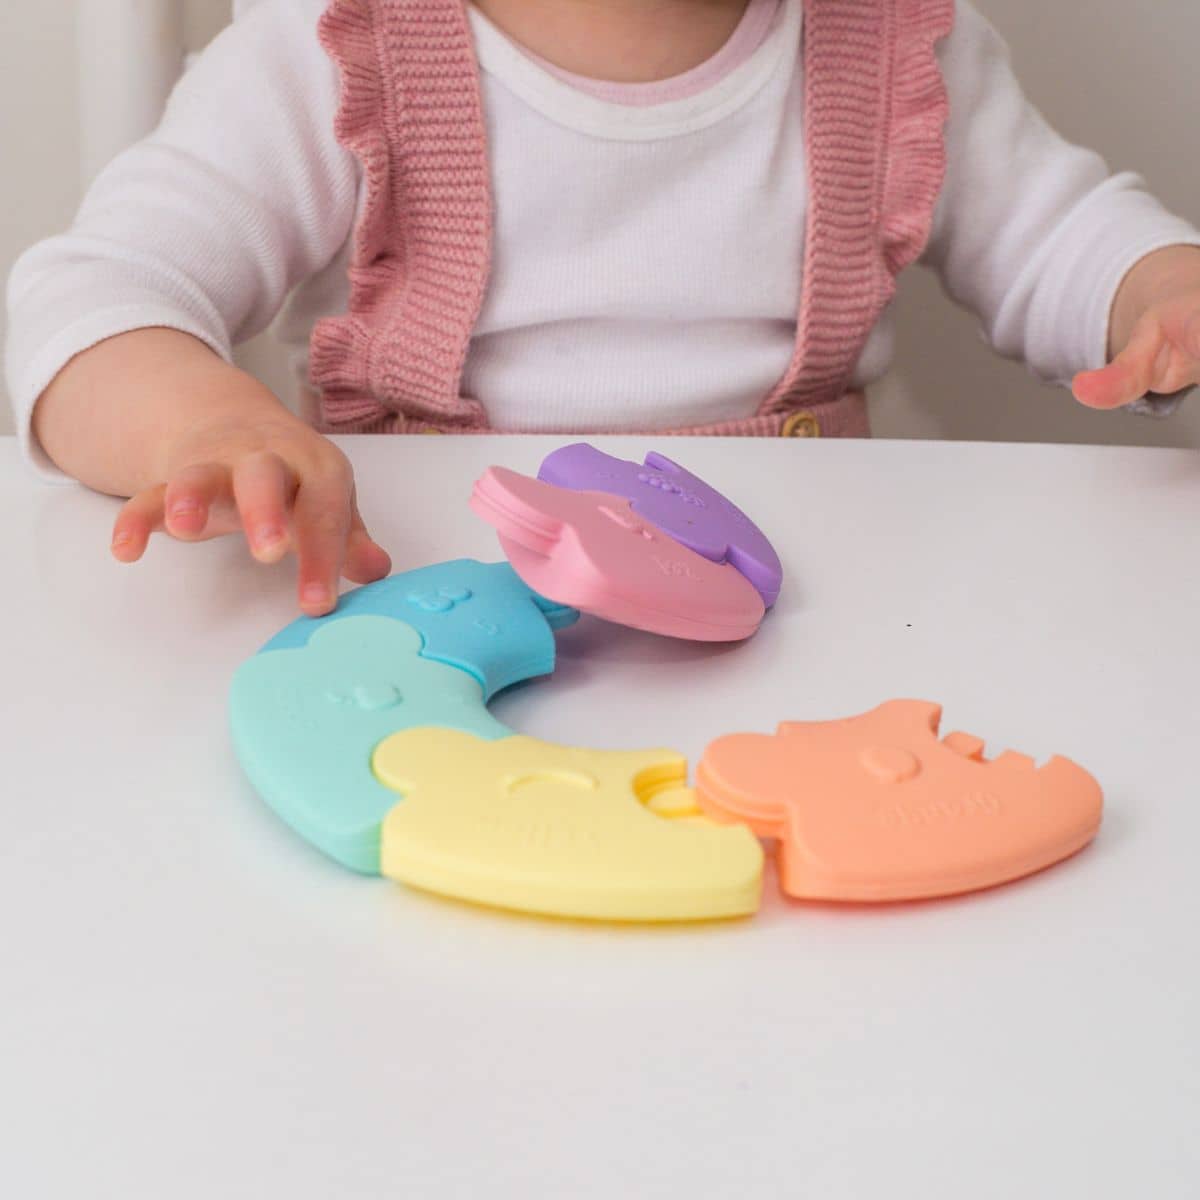 Jellystone Designs Colour Wheel Teether and Toy - Pastel